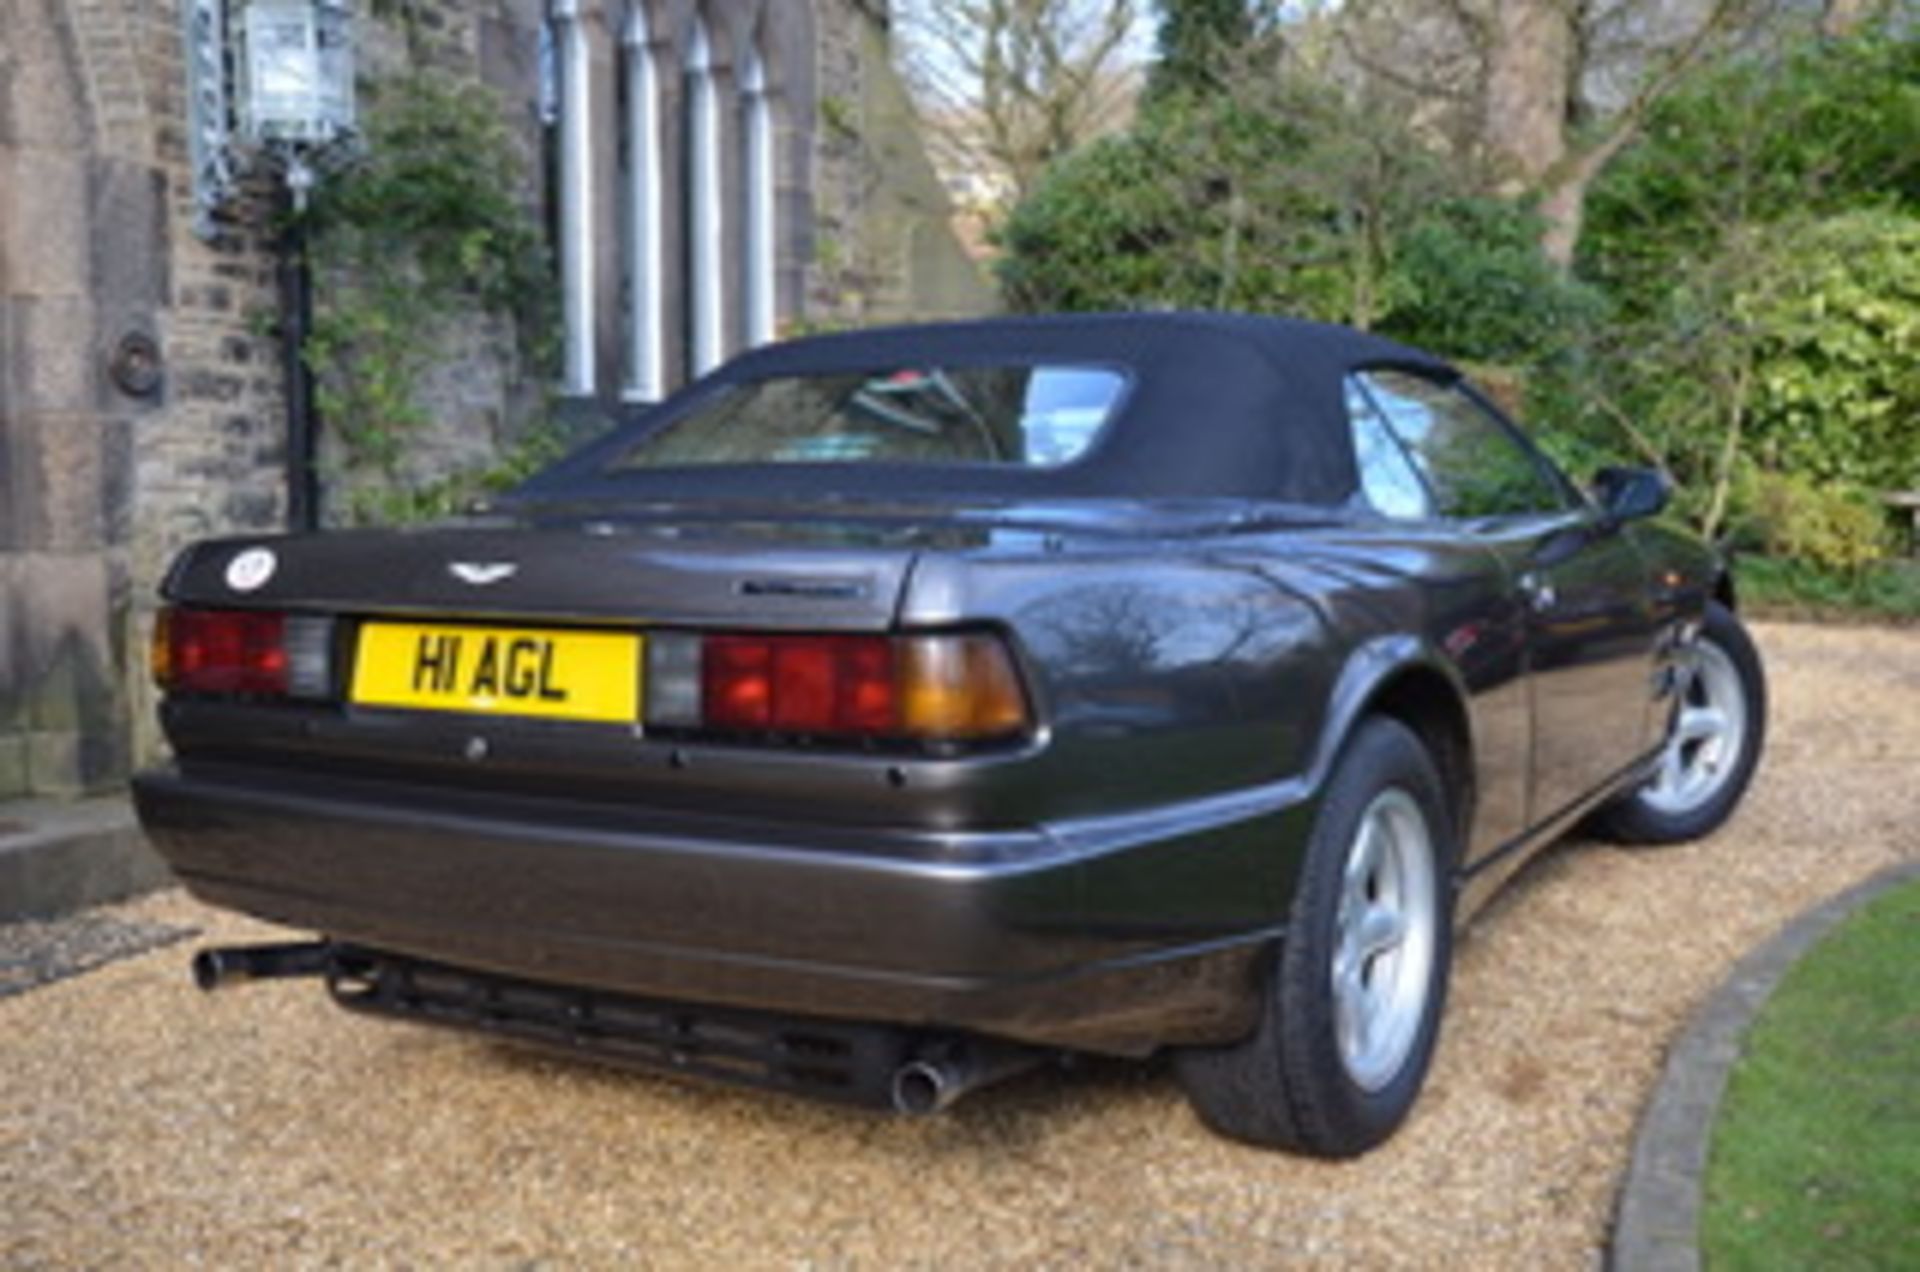 1993 Aston Martin Virage Volante - Having 11 months MOT and aviators number plate H1 AGL - Image 21 of 48